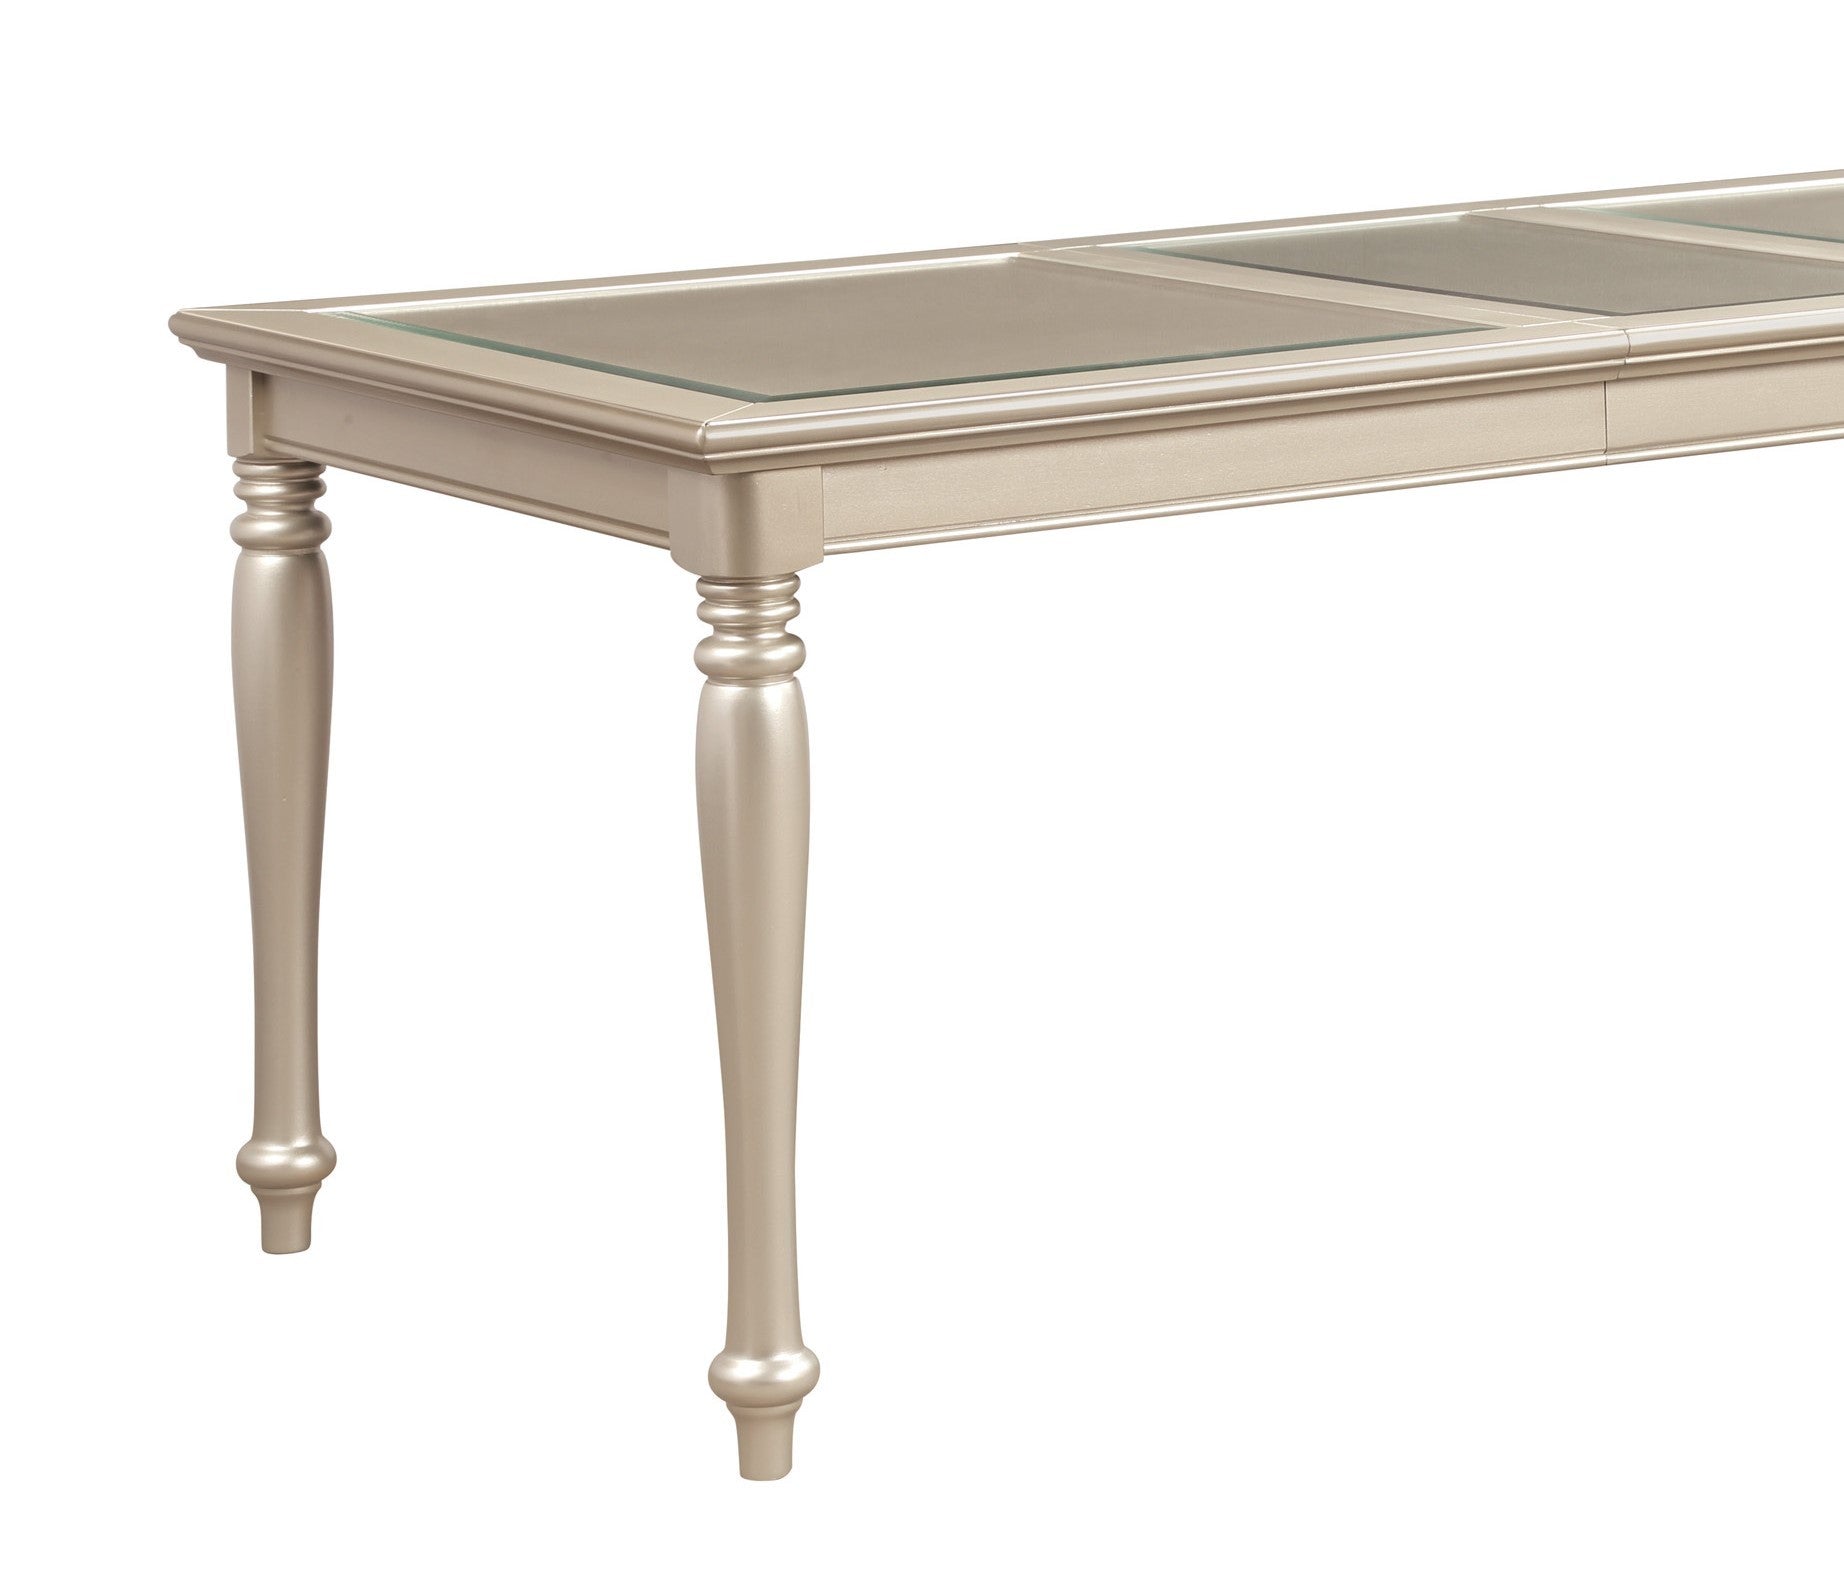 Traditional Design Silver Finish Dining Table 1pc silver-dining room-glam-modern-traditional-wood